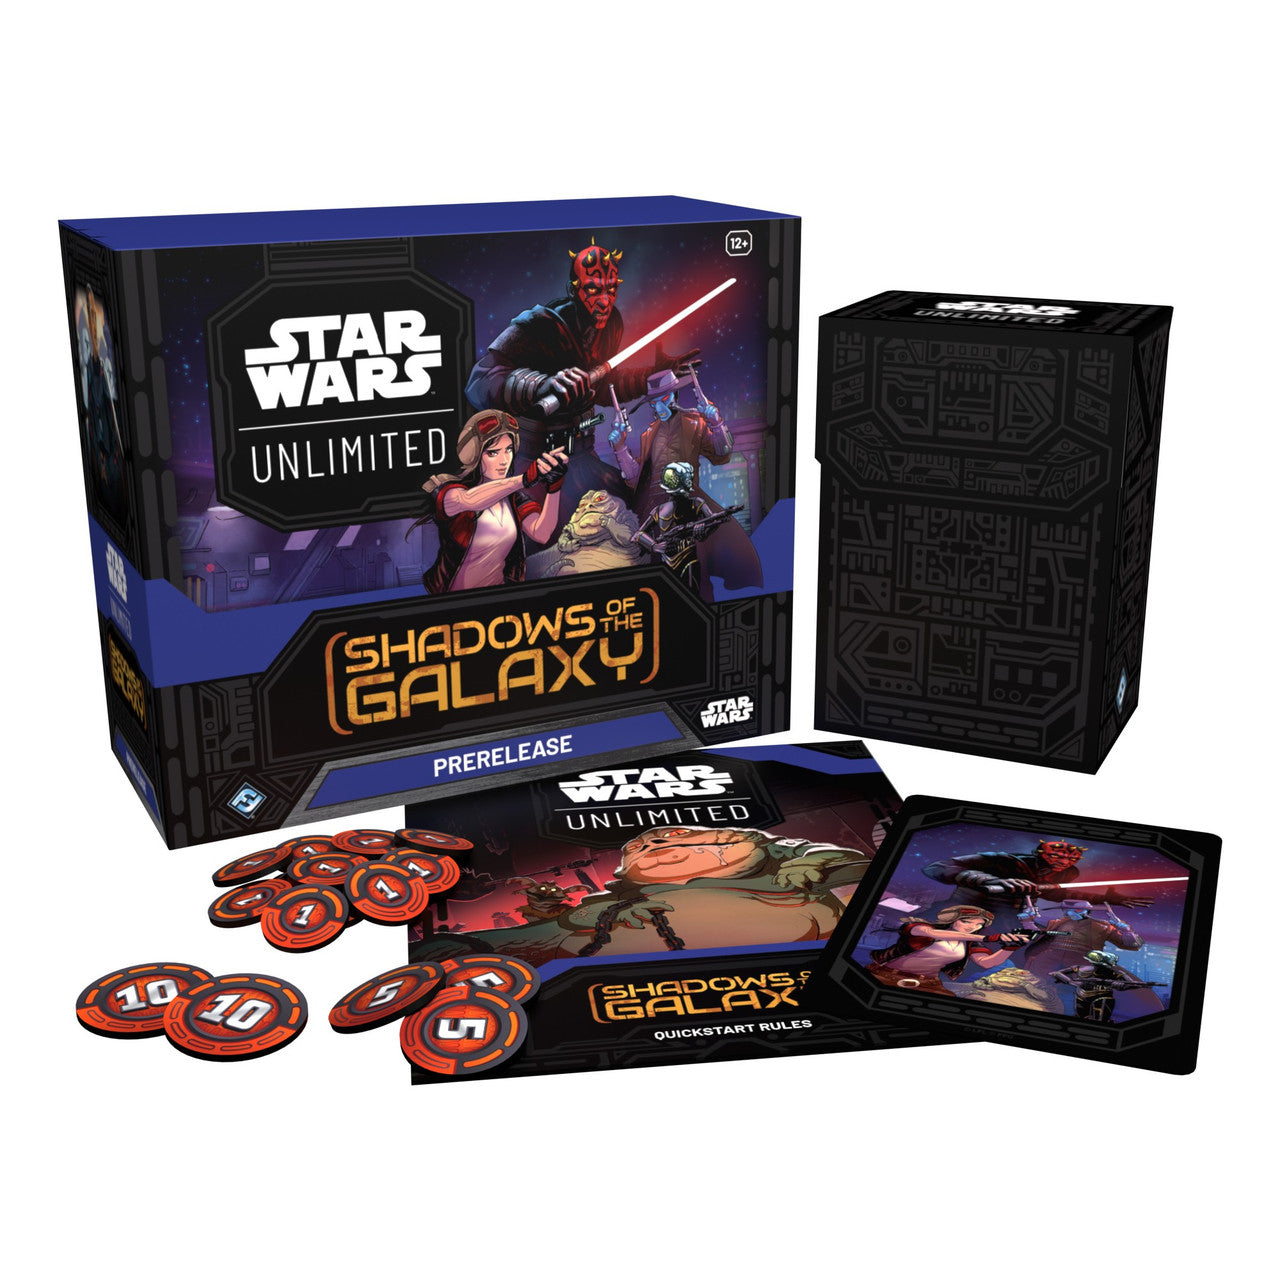 Star Wars Unlimited Shadows of the Galaxy Prerelease Saturday 7/6 1PM